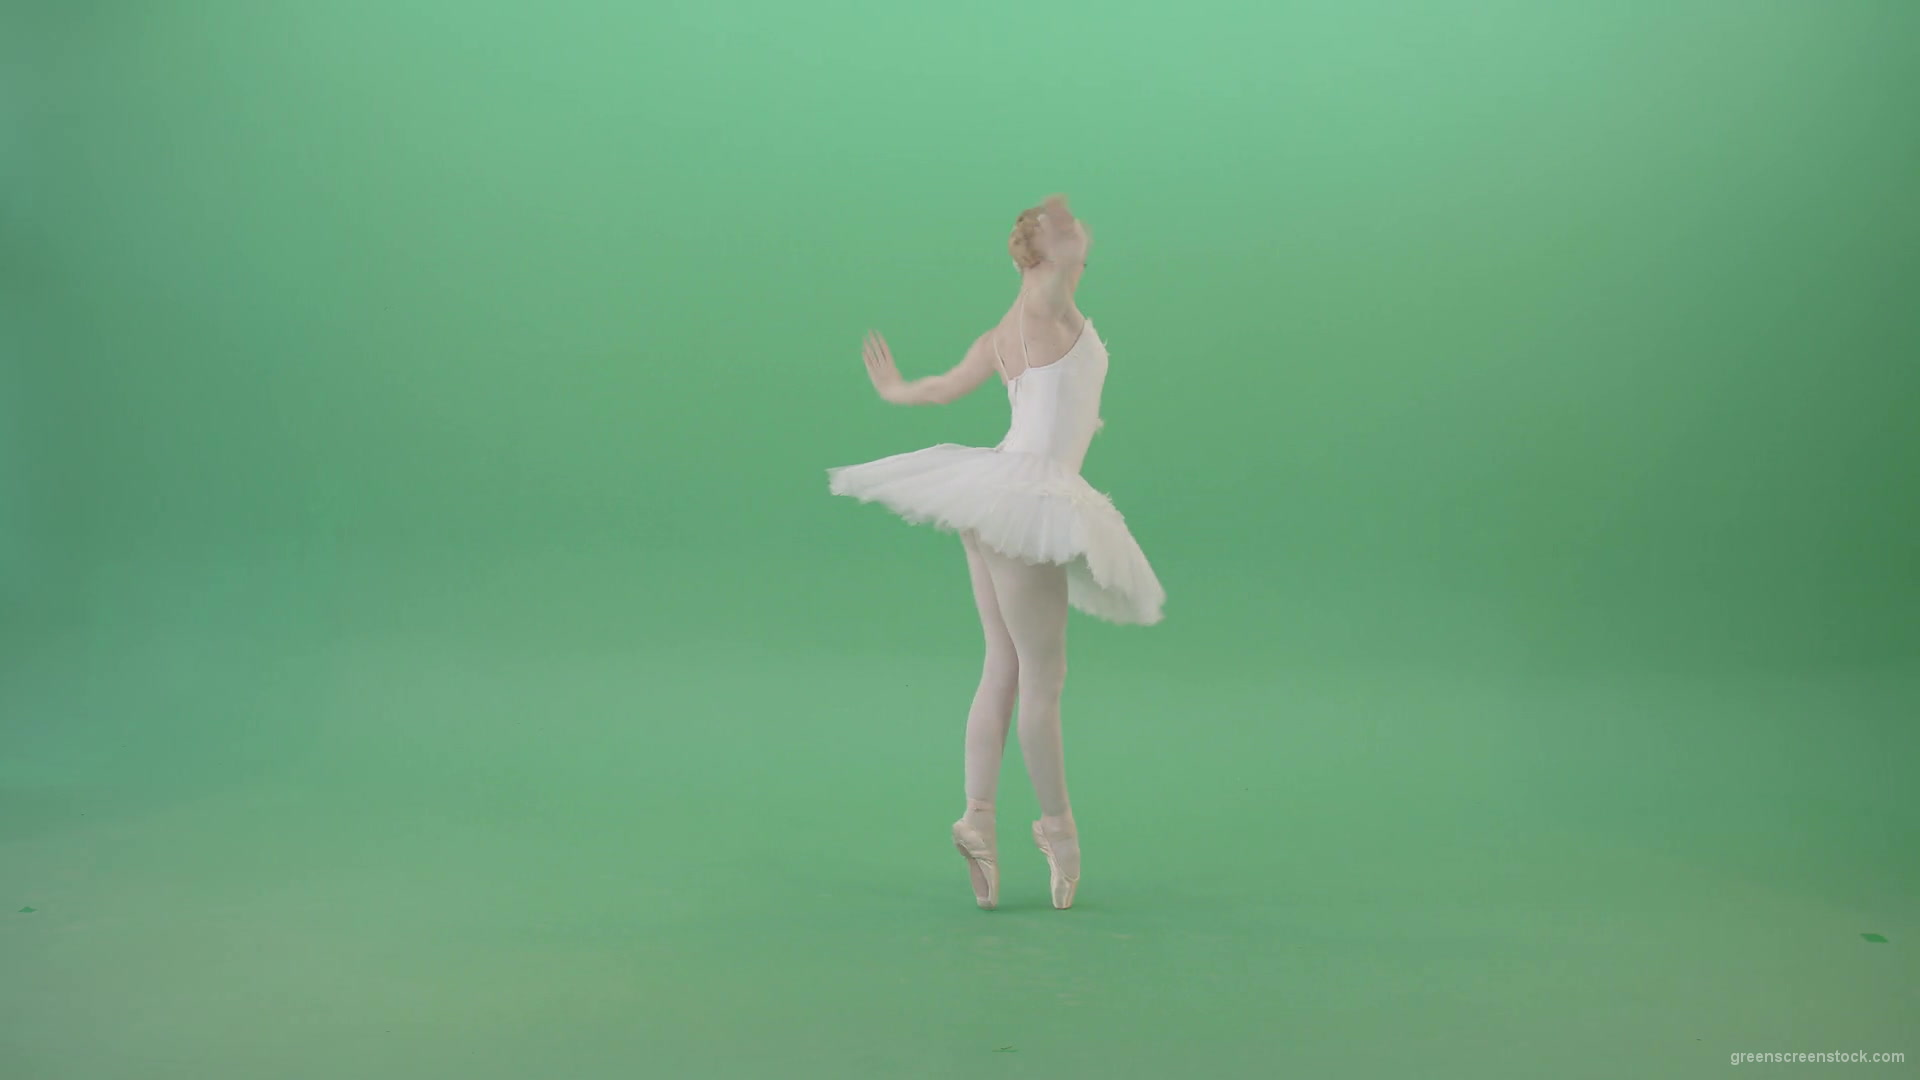 Back-side-view-ballet-dancing-tiny-girl-performs-in-green-screen-studio-4K-Video-Footage-1920_005 Green Screen Stock